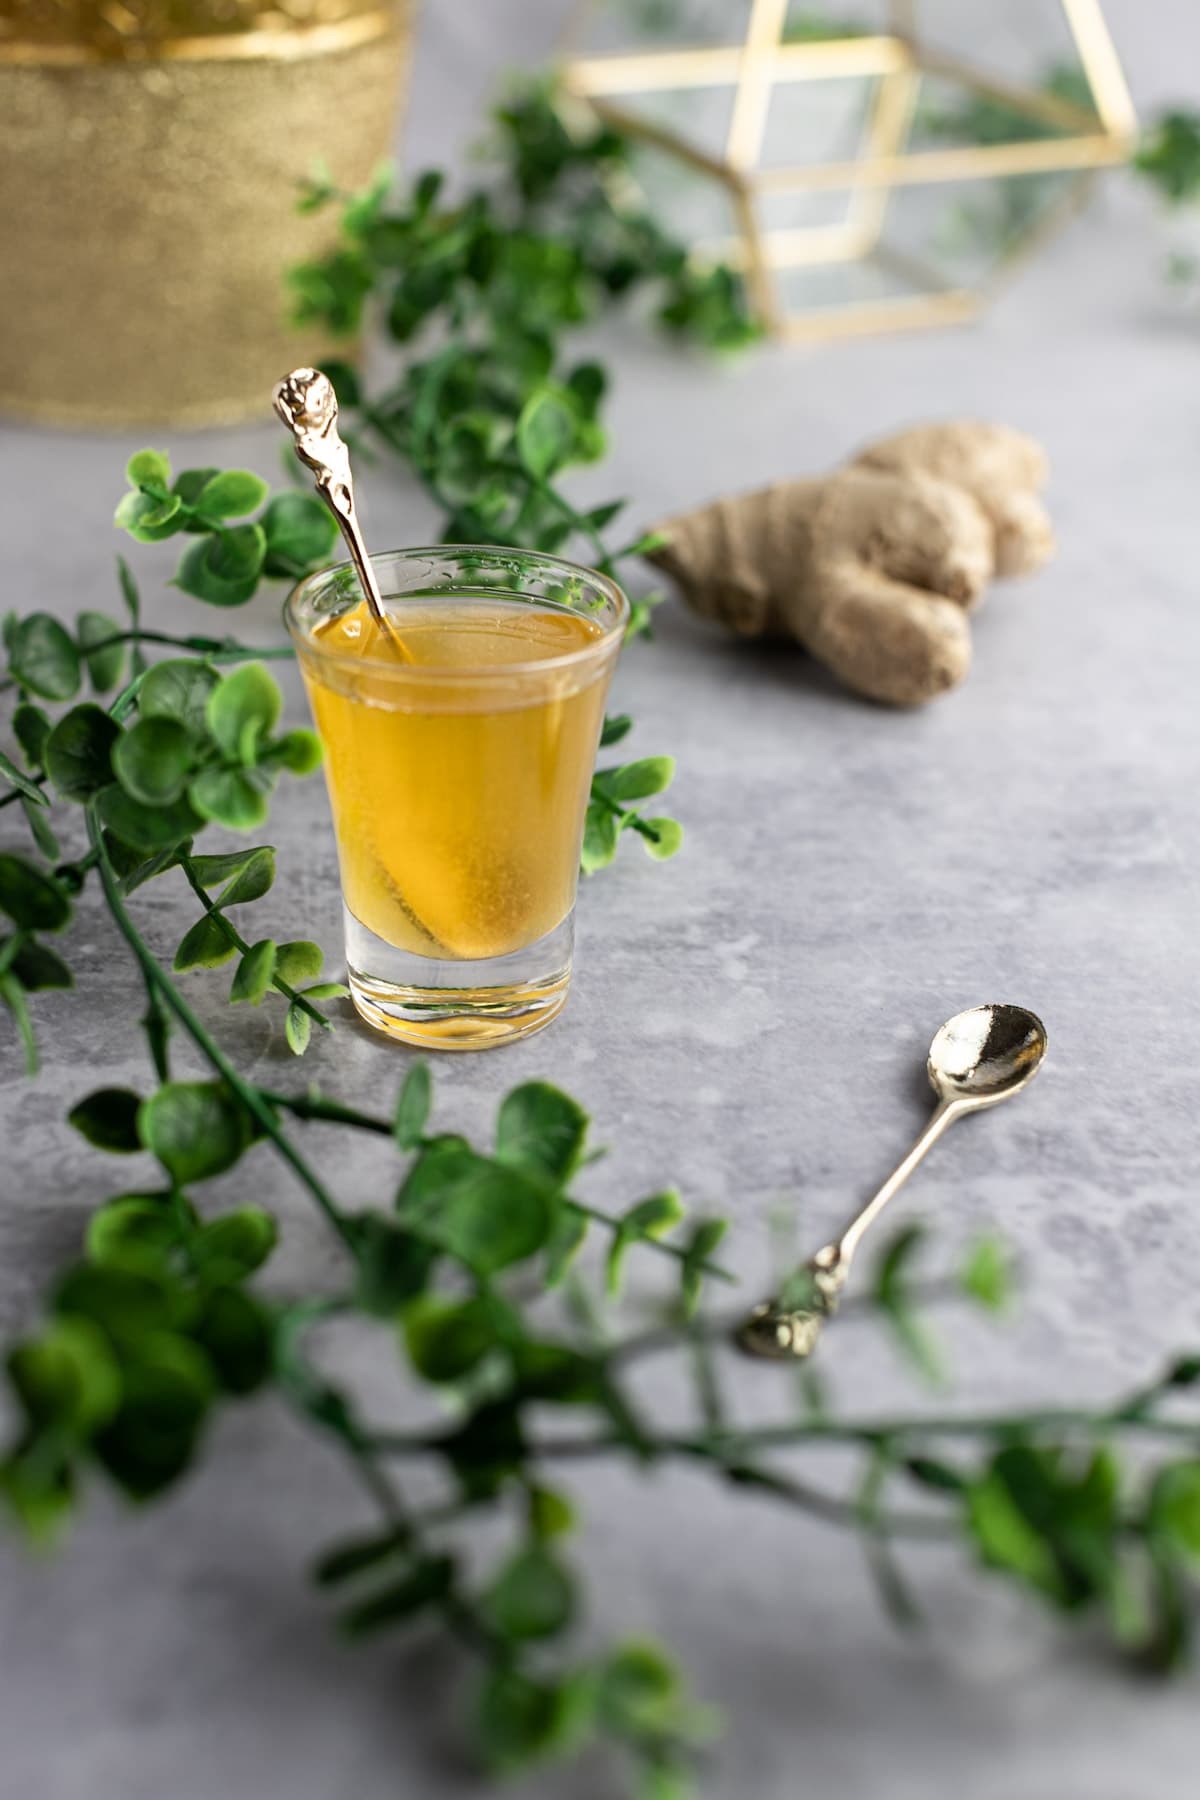 A small glass of simple syrup, on a grey table, next to a golden spoon, with green leaves across the table.